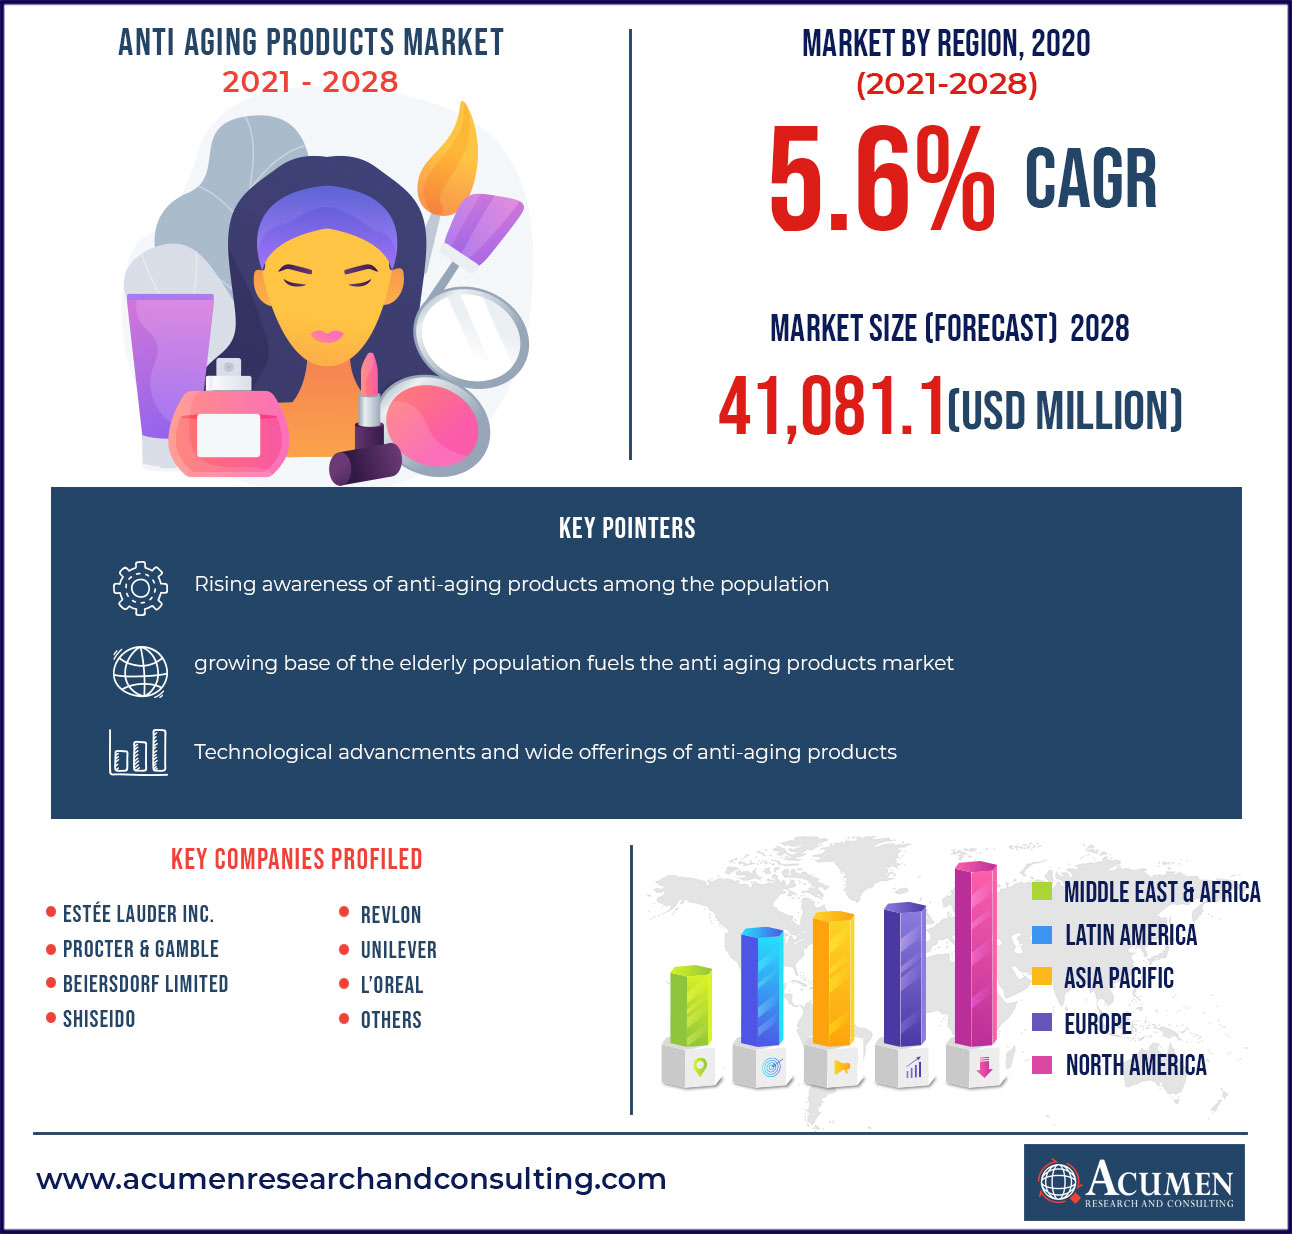 Anti Aging Products Market Accounted For US$ 41,081.1 Mn In 2020 And Projected To Reach US$ 72.1 Bn By 2028 With A Considerable CAGR Of 5.6% During 2021-2028